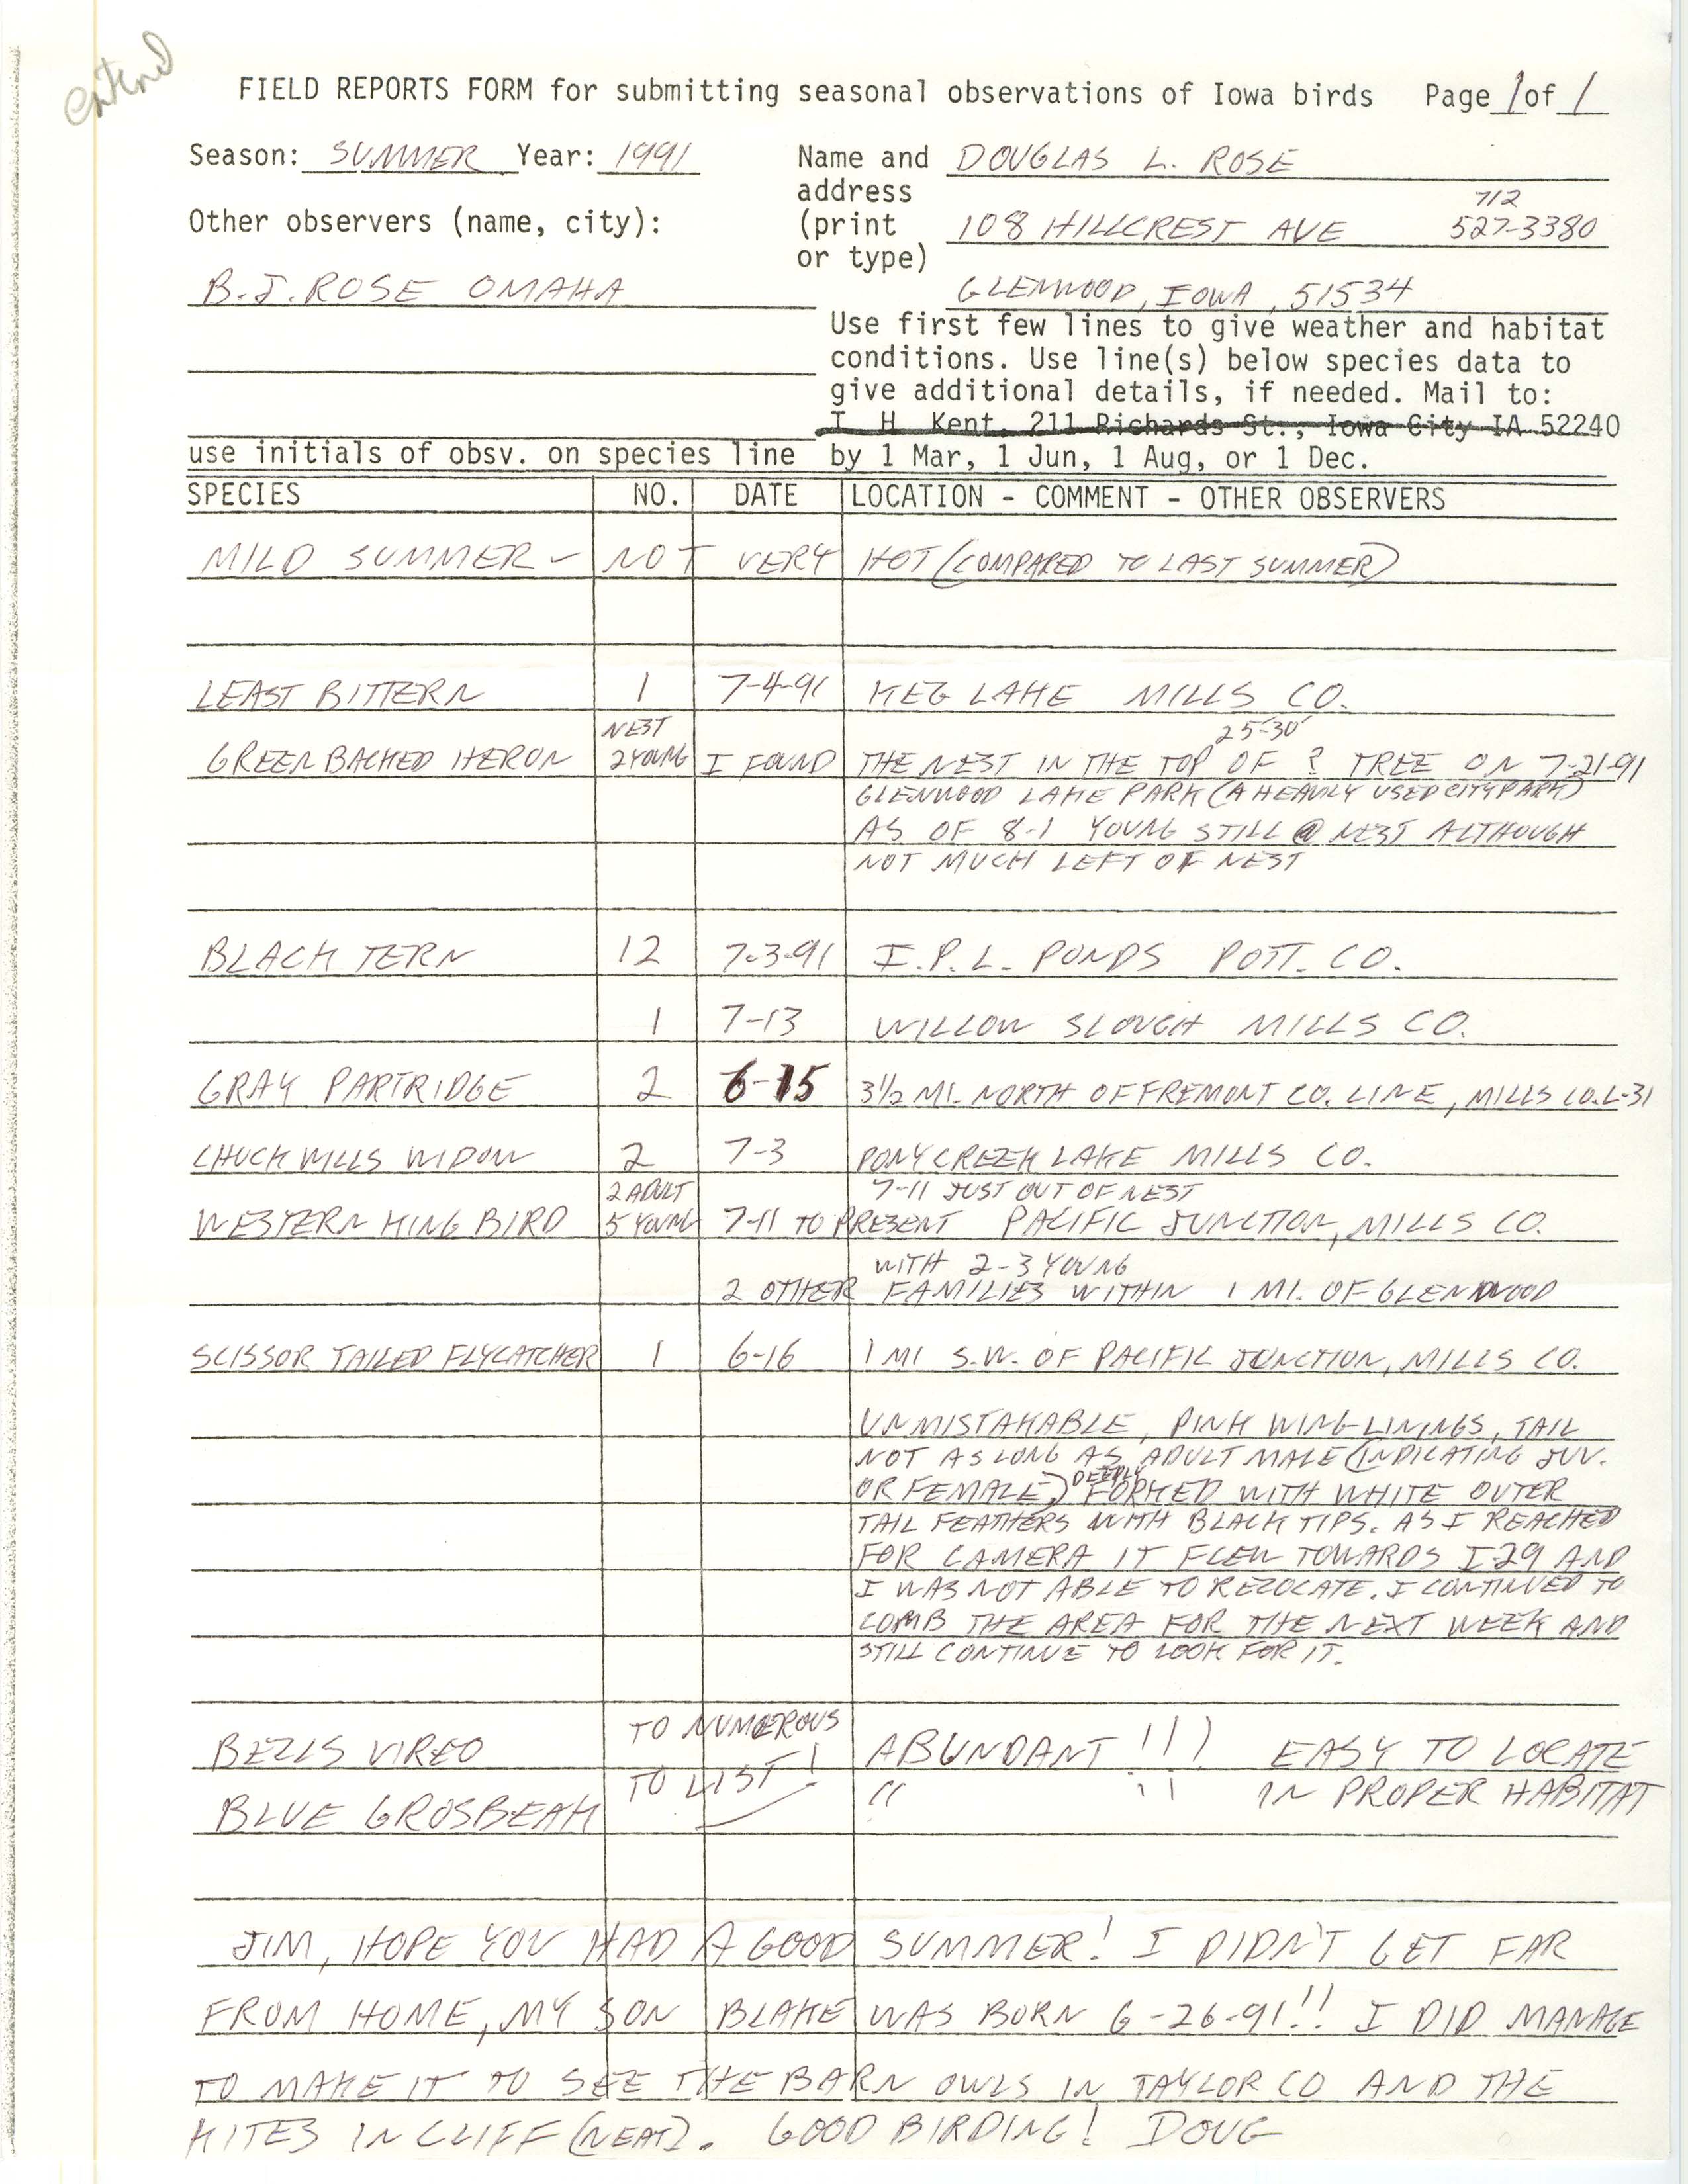 Field reports form for submitting seasonal observations of Iowa birds, Douglas Rose, summer 1991